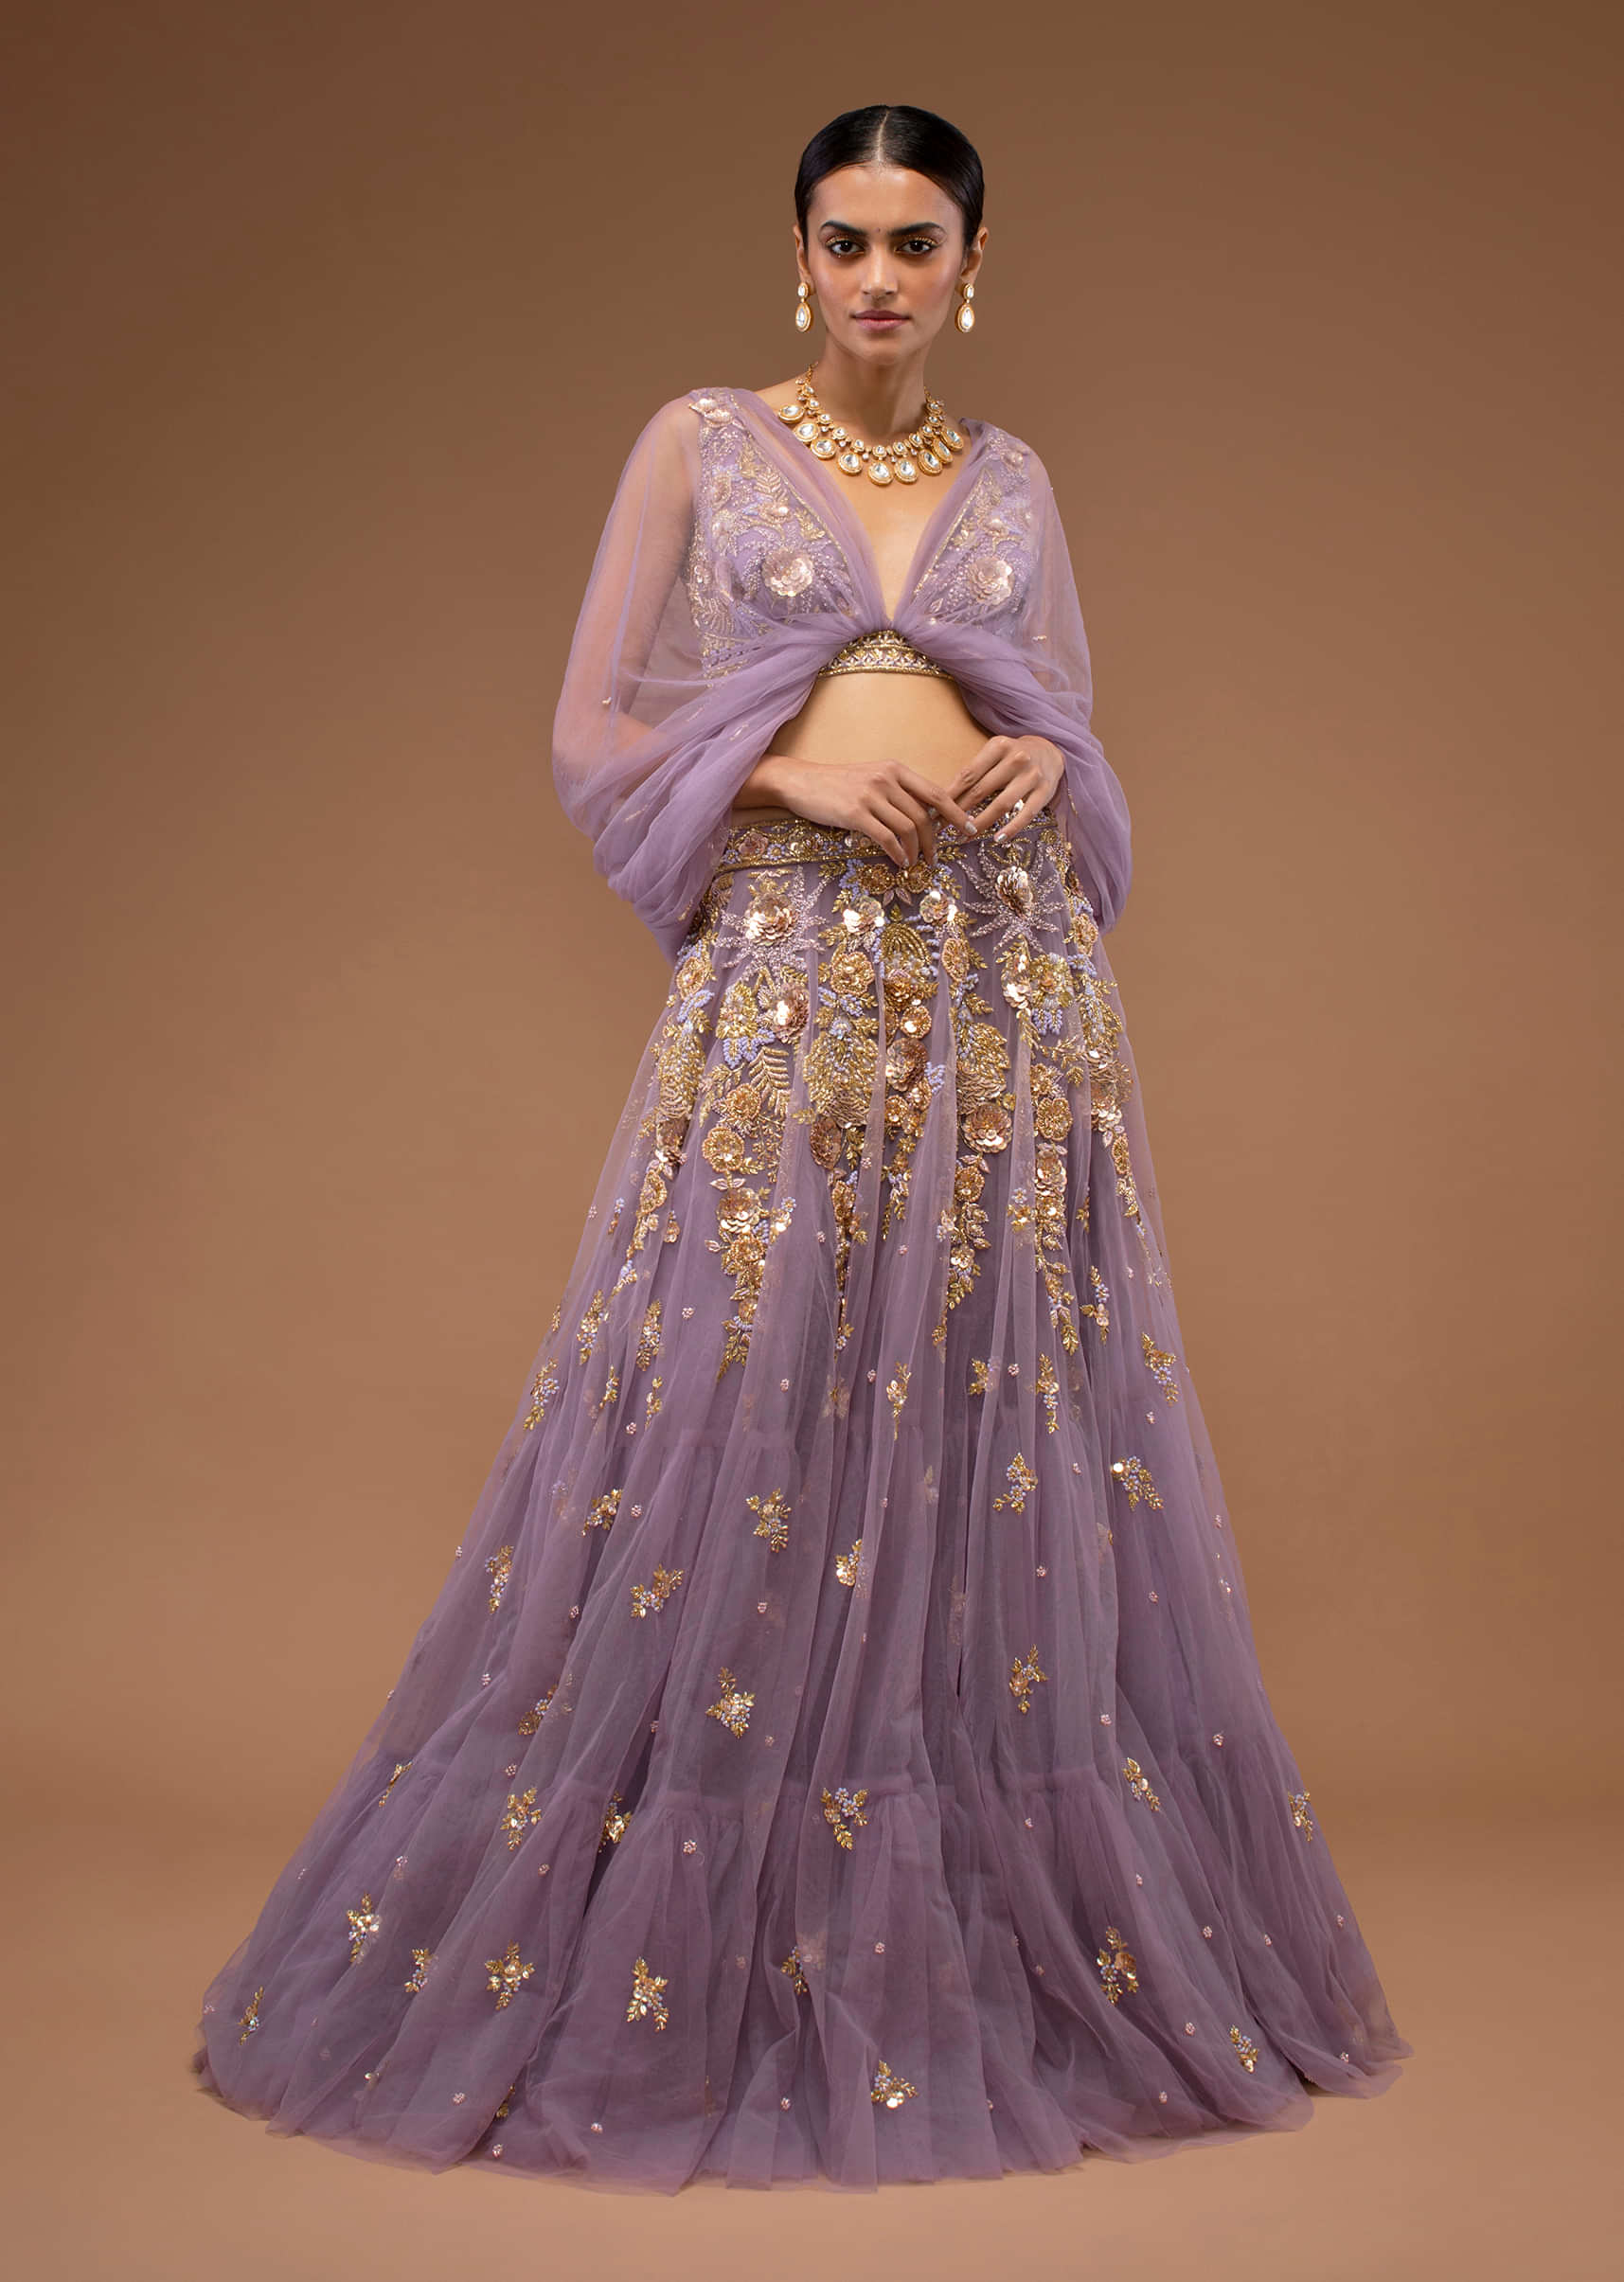 Shivani Singh In Kalki Lavender Skirt And Blouse With A Three Way Fancy Drape And Hand Embroidery